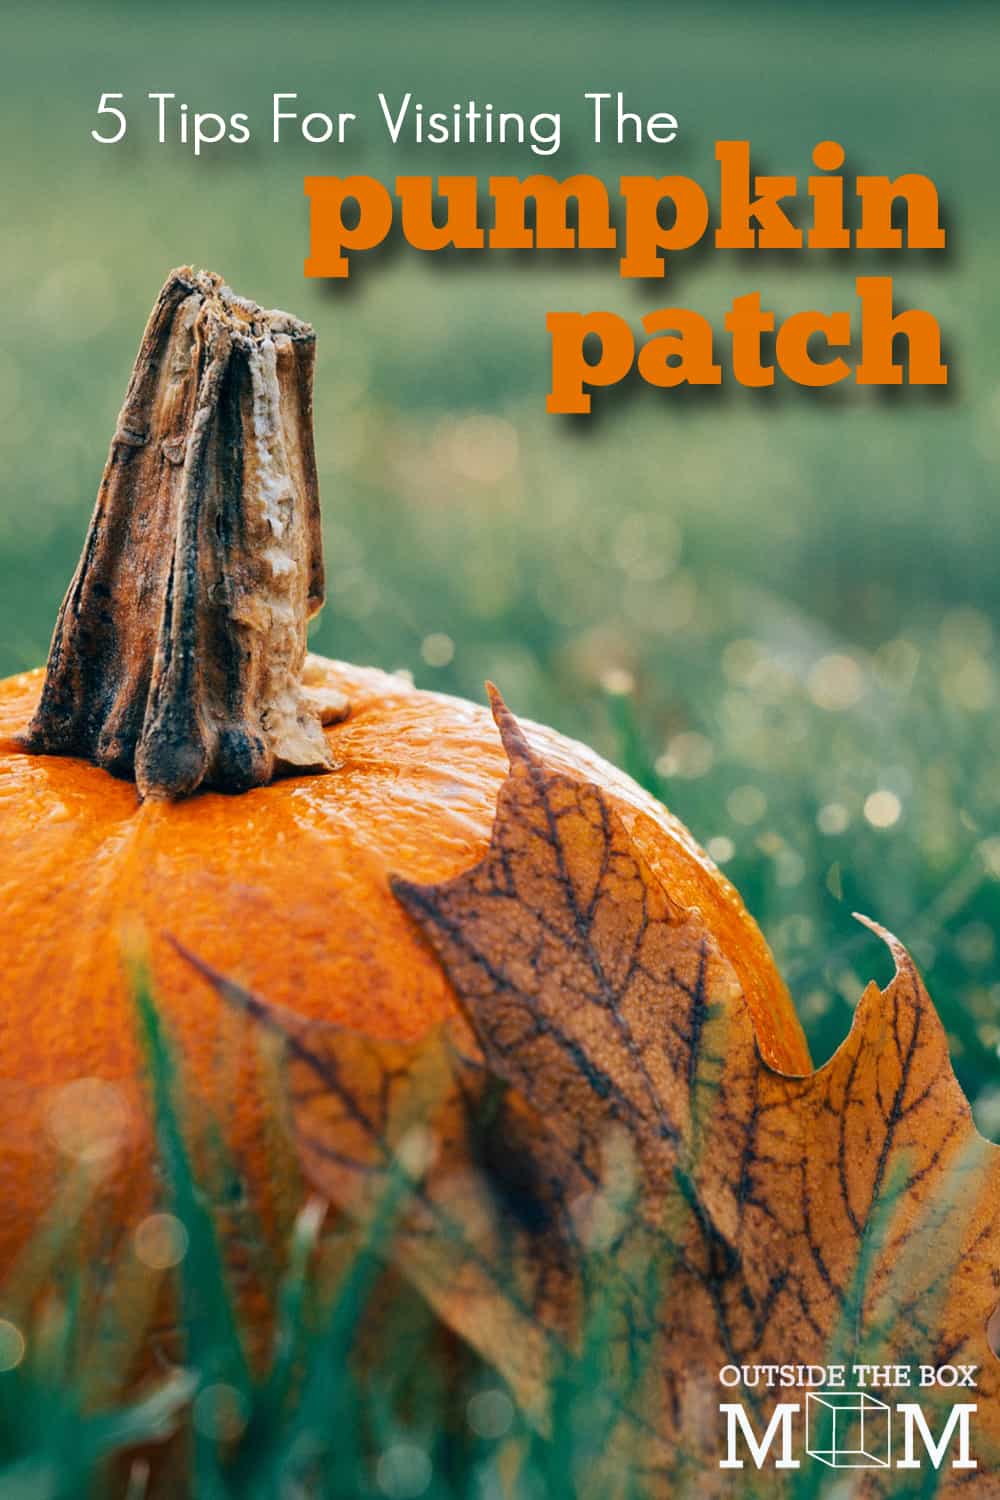 tips for visiting the pumpkin patch | pumpkin patch